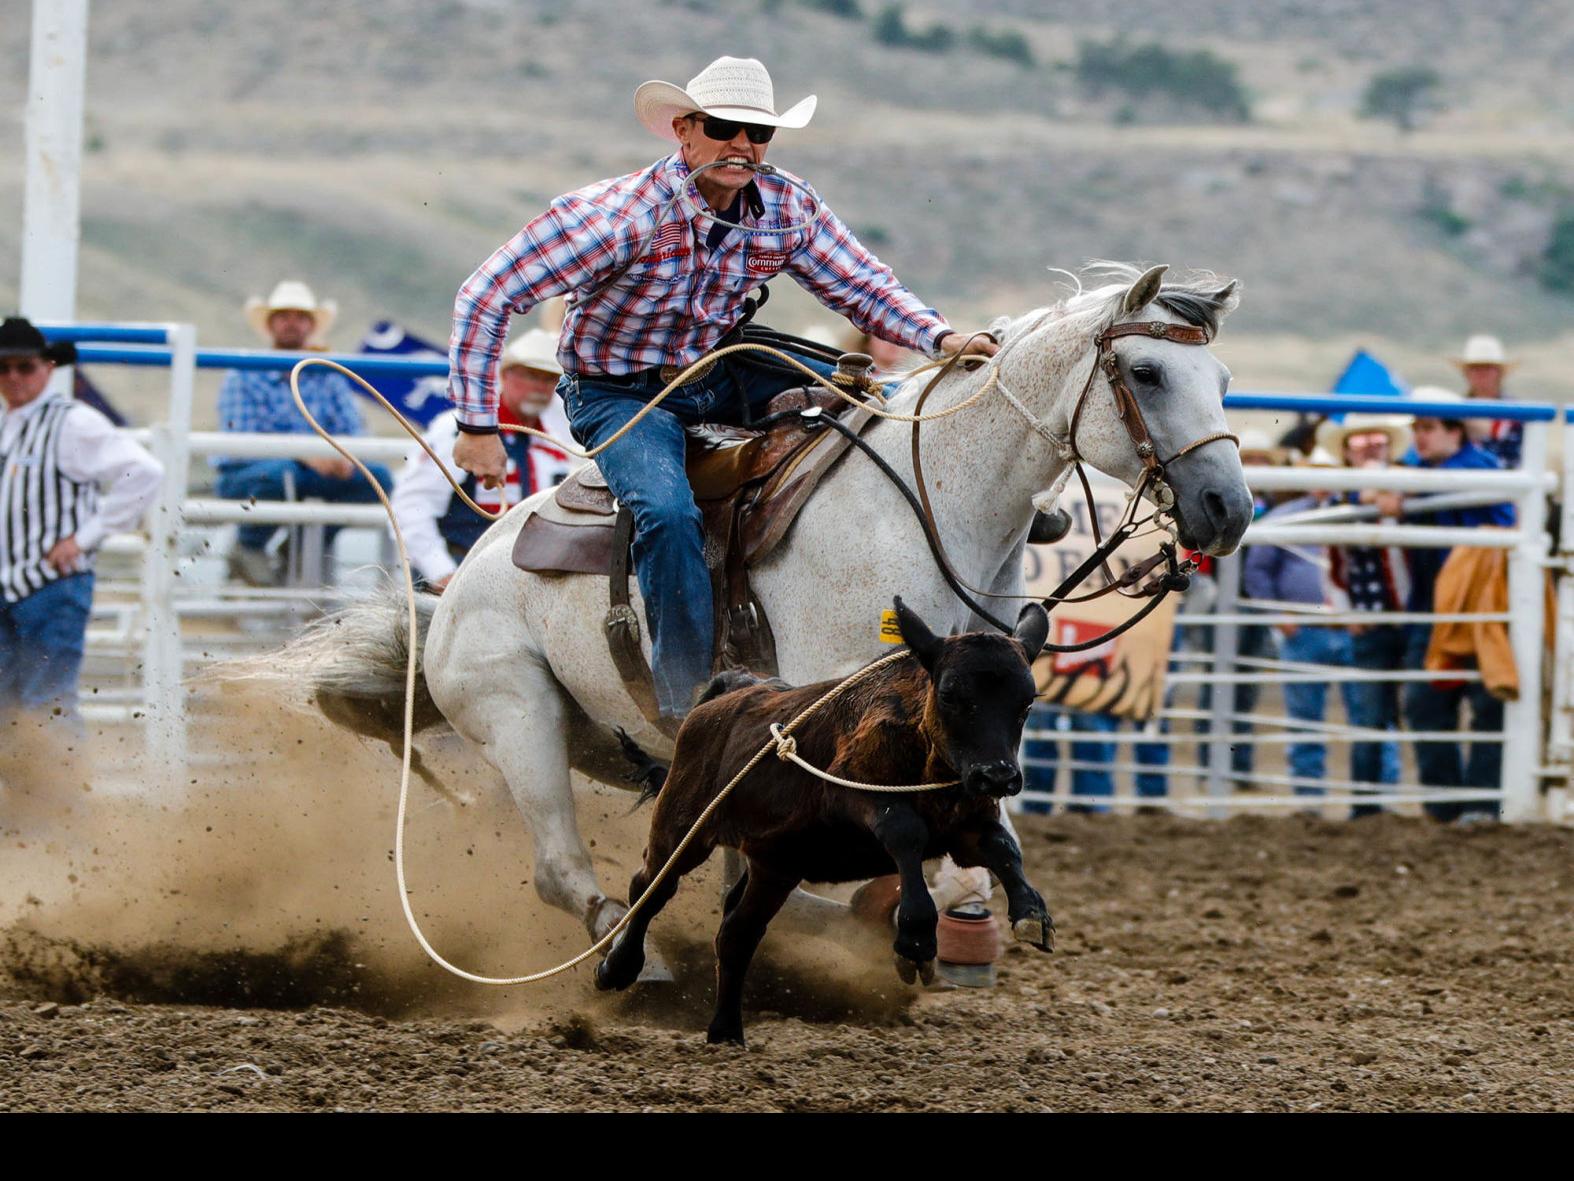 Tuf Cooper Wins Tie Down Roping At Cody Stampede For Second Year In A Row Rodeo Trib Com